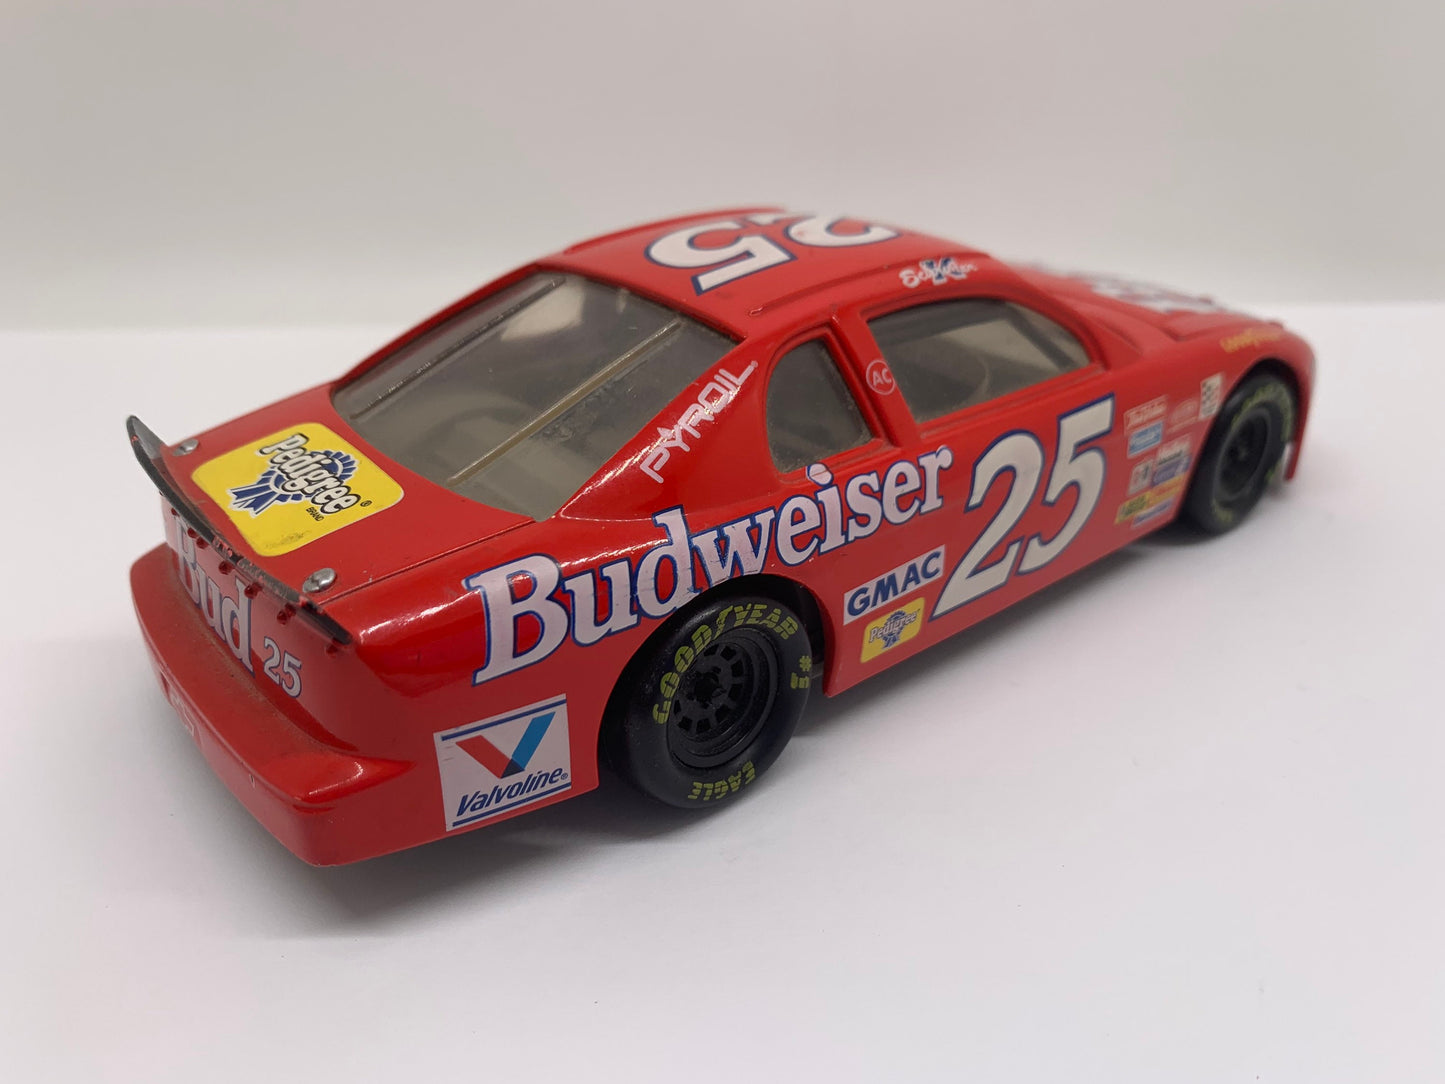 Revell Ricky Craven #25 Chevy Monte Carlo Red Budweiser Perfect Birthday Gift Collectable 1:24 Scale Model Toy Car Nascar Replica